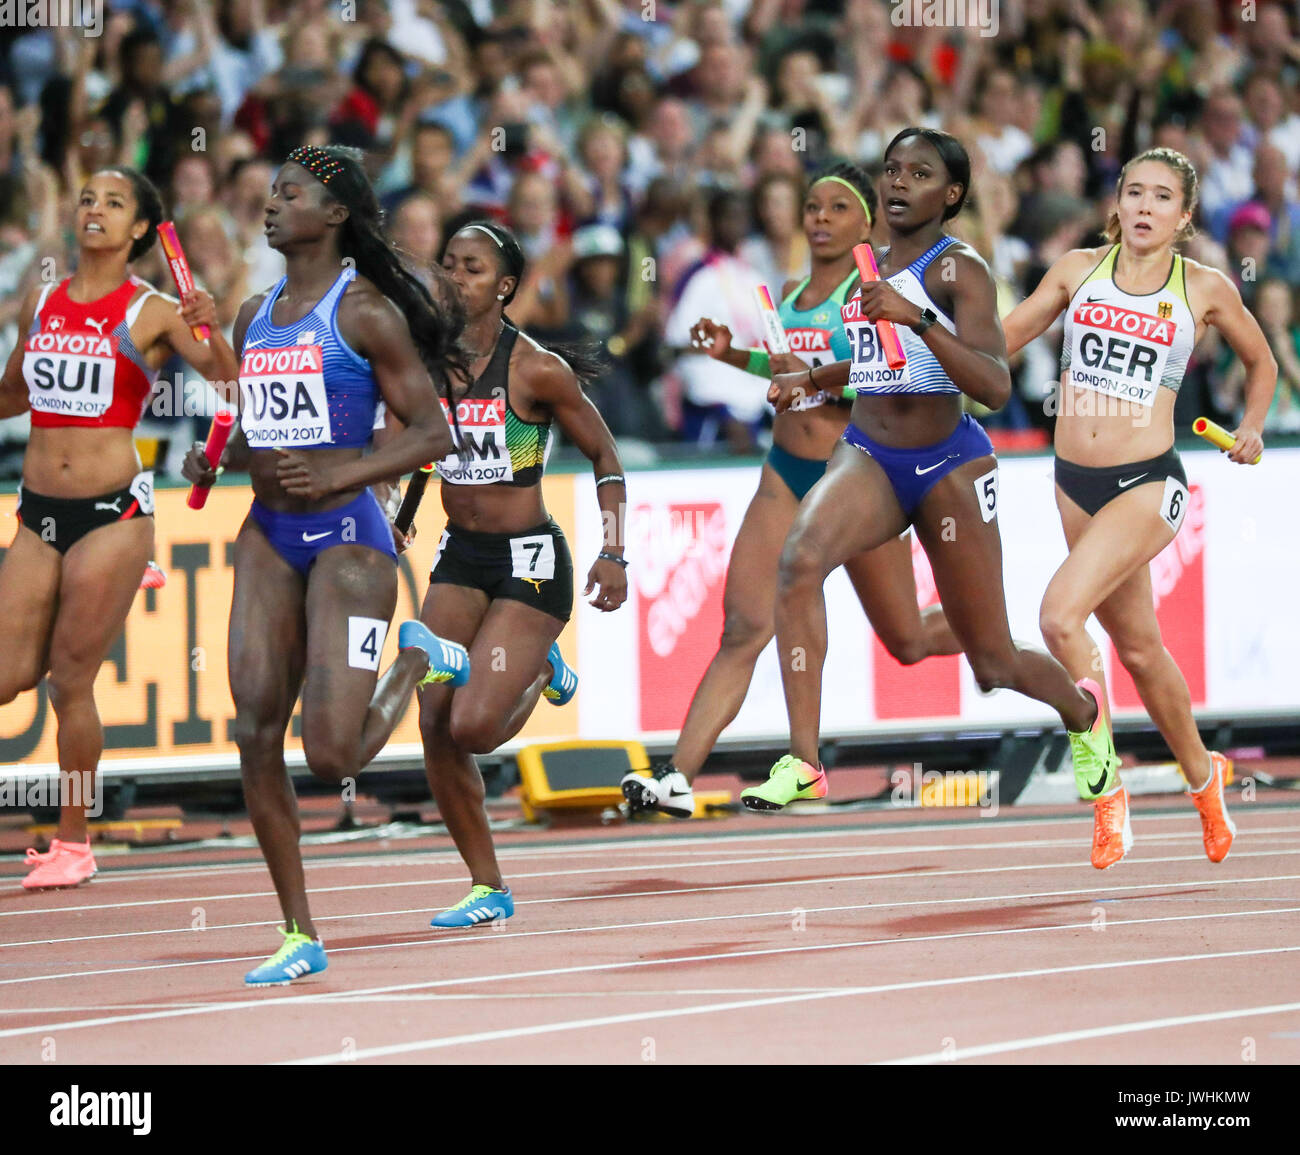 London, UK. 12th Aug, 2017.  Tori Bowie, USA, wins ahead Great Britain's Daryll Neita and Jamaica's Sashalee Forbes in the women's 4x100m relay on day nine of the IAAF London 2017 world Championships at the London Stadium. Credit: Paul Davey/Alamy Live News Stock Photo